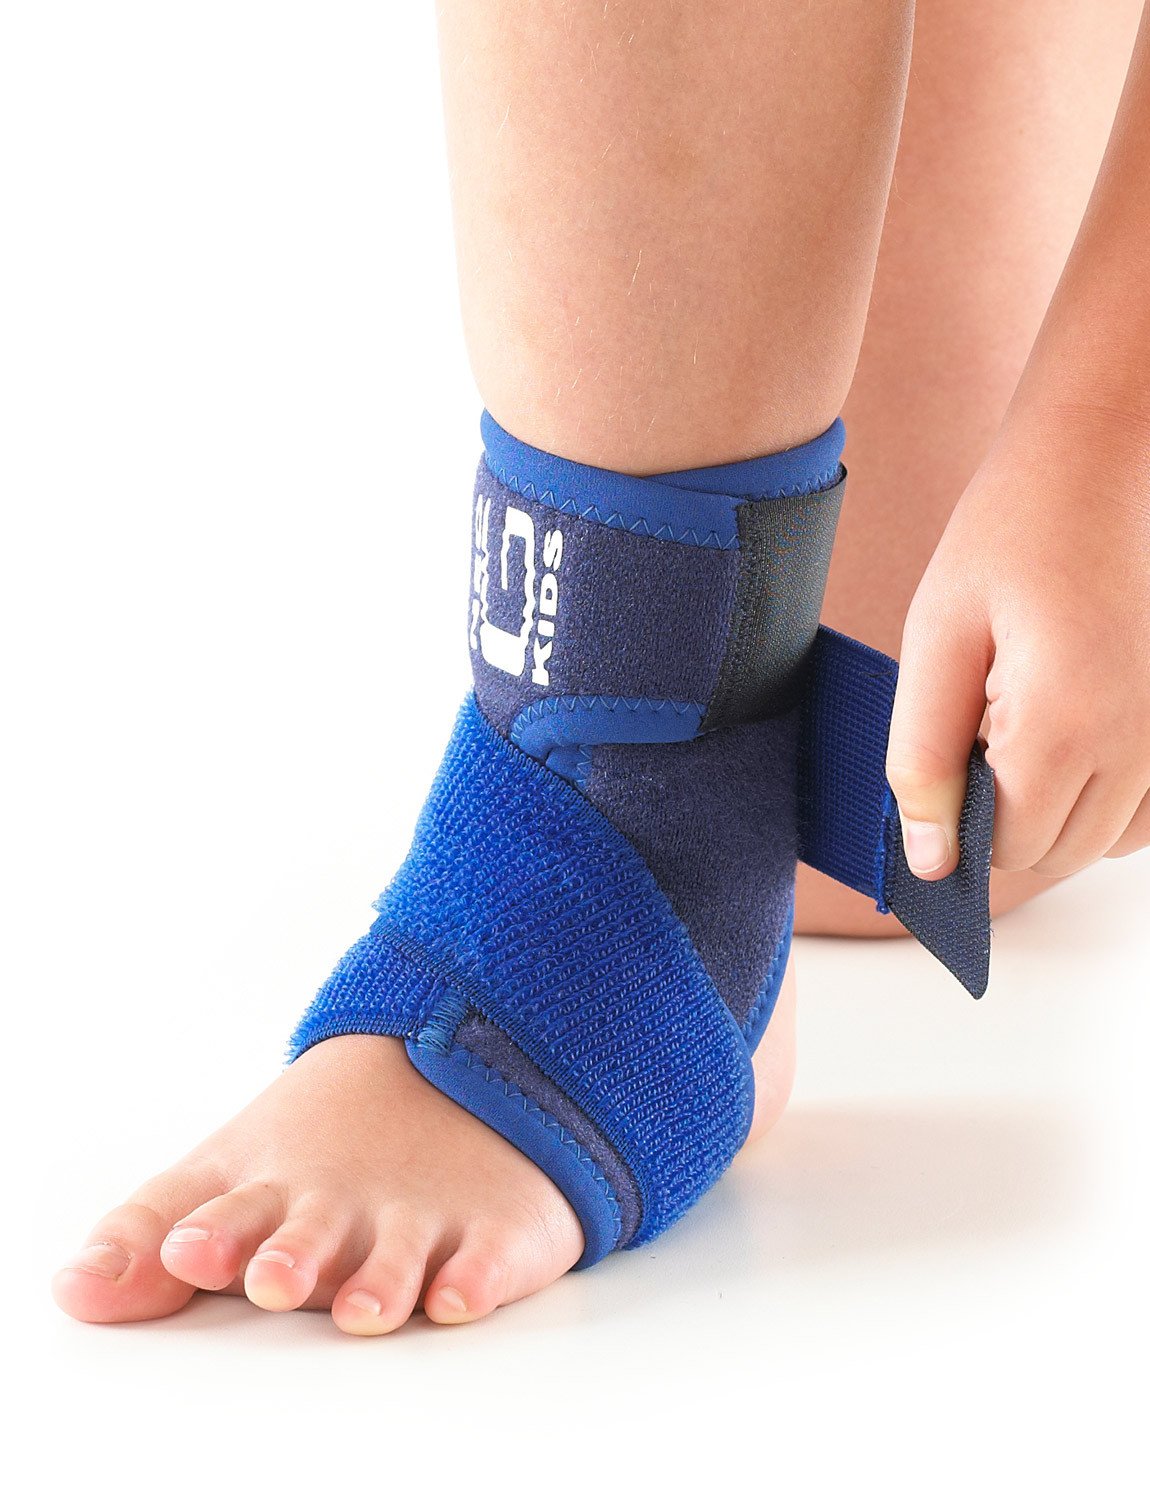 Top 3 Ankle Braces for Ankle Sprains | Physical Therapist Review - YouTube